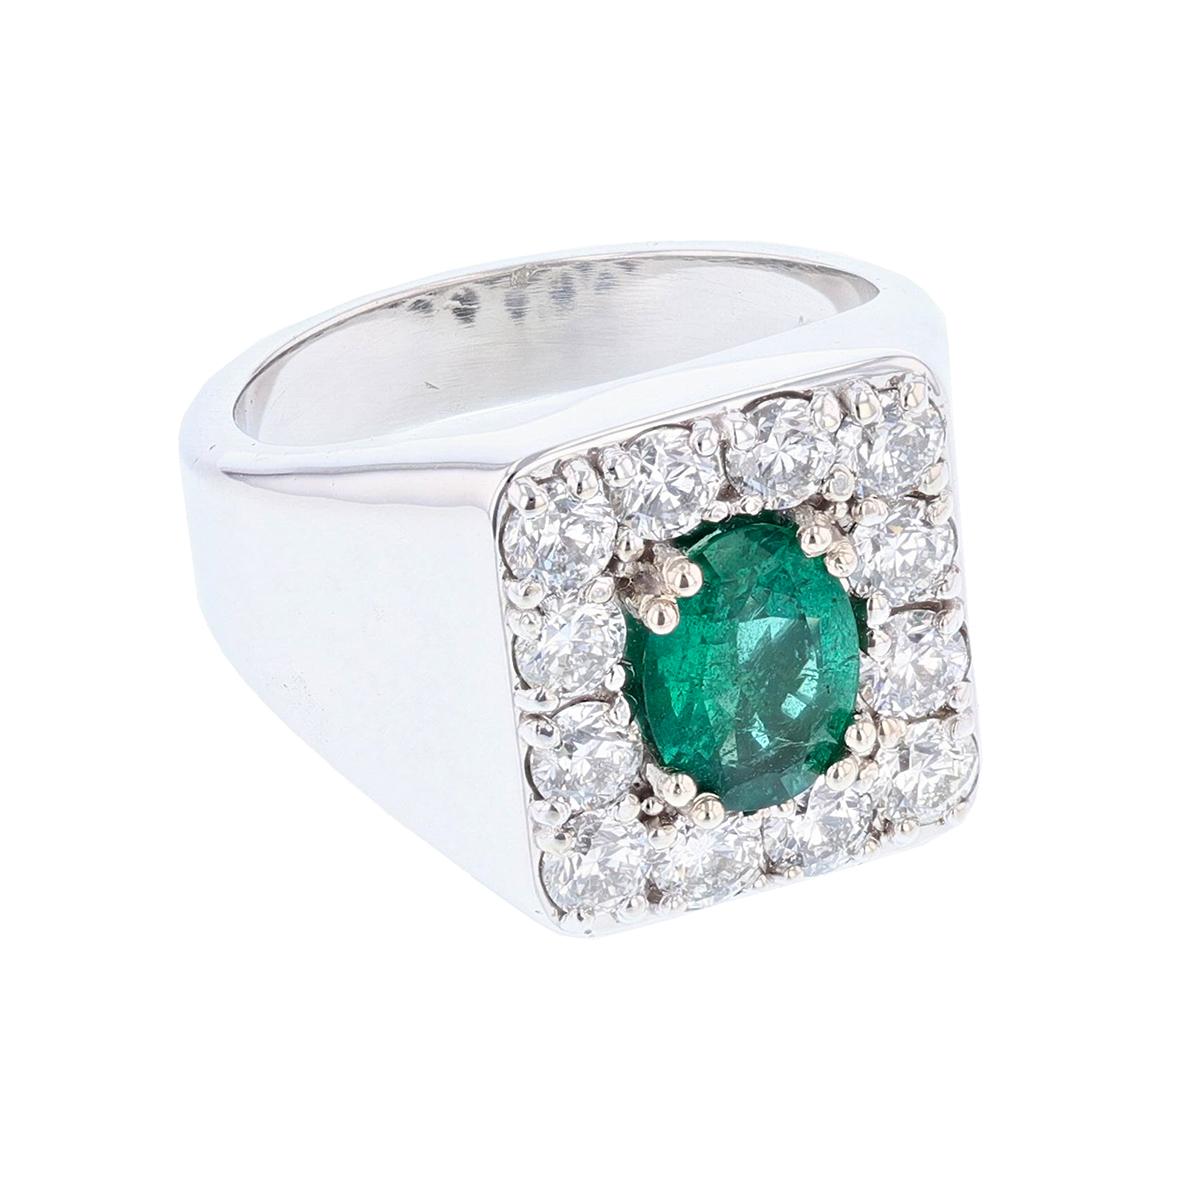 This gent's ring is made in 14 karat white gold featuring one oval cut Emerald weighing 1.44 ct that is prong set. The certificate number is GIA 2205469285. The ring features 12 round cut diamonds, prong set weighing 2.27cts with a color grade (H)